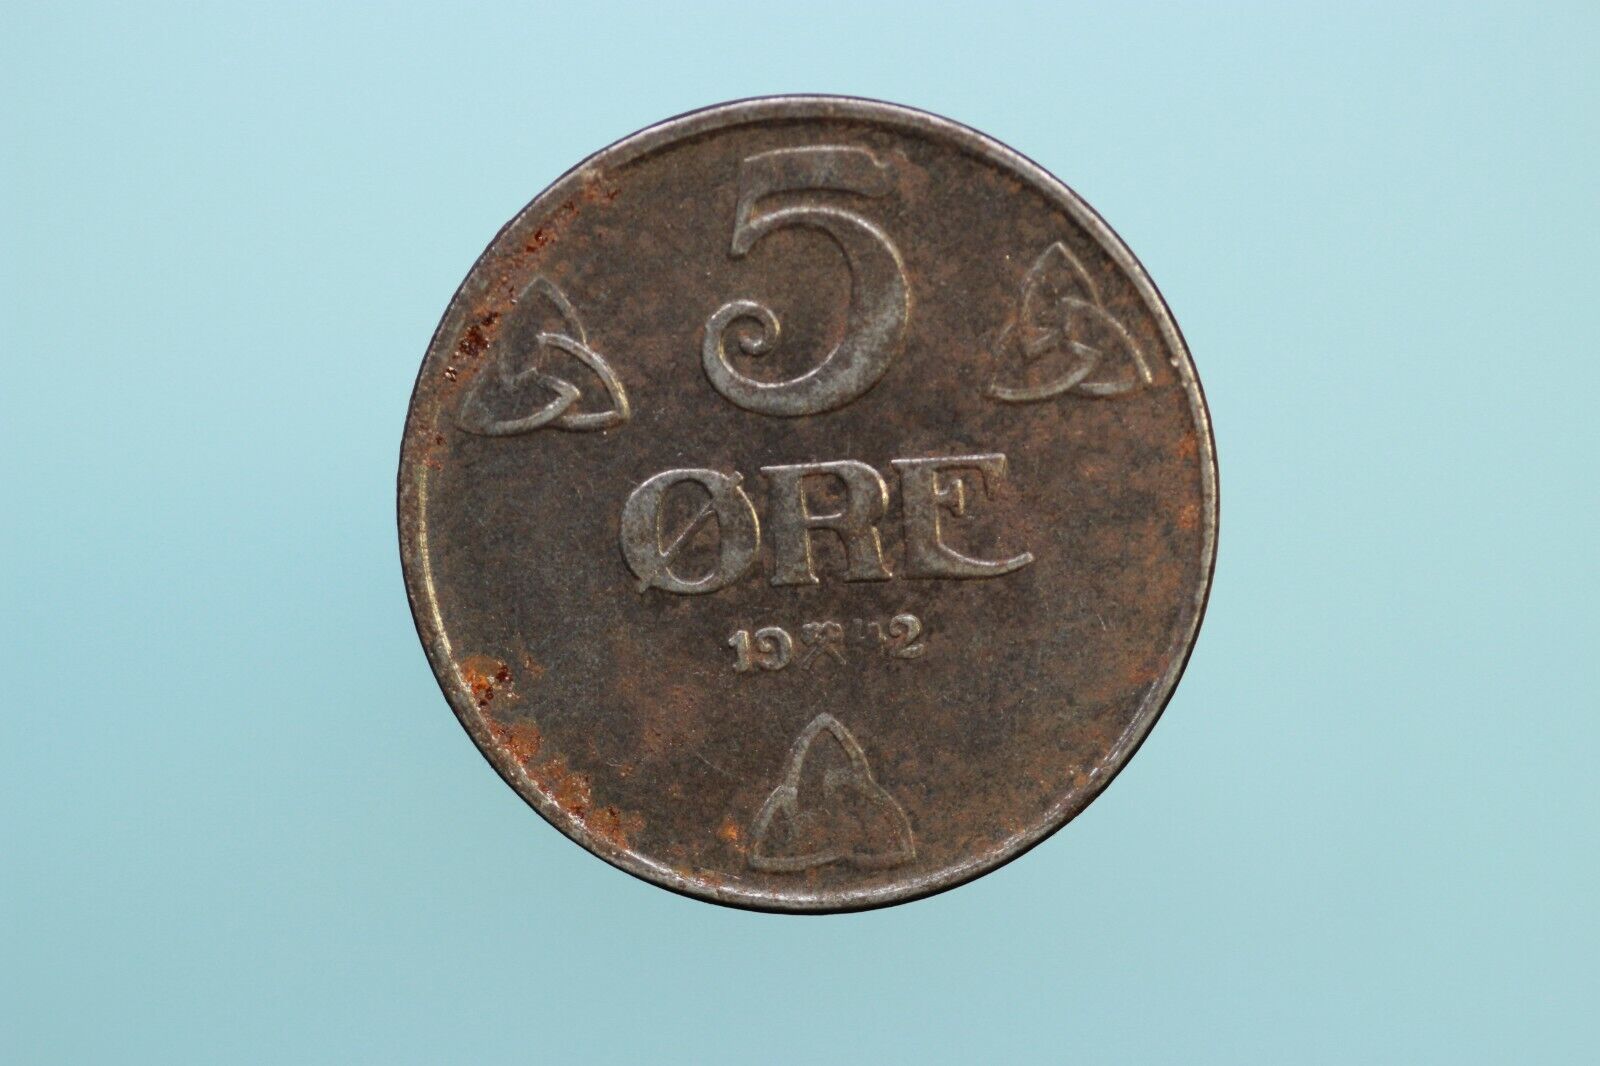 Norway bronze 5 Ore 1914 and 1942 lot of 2 coins Без бренда